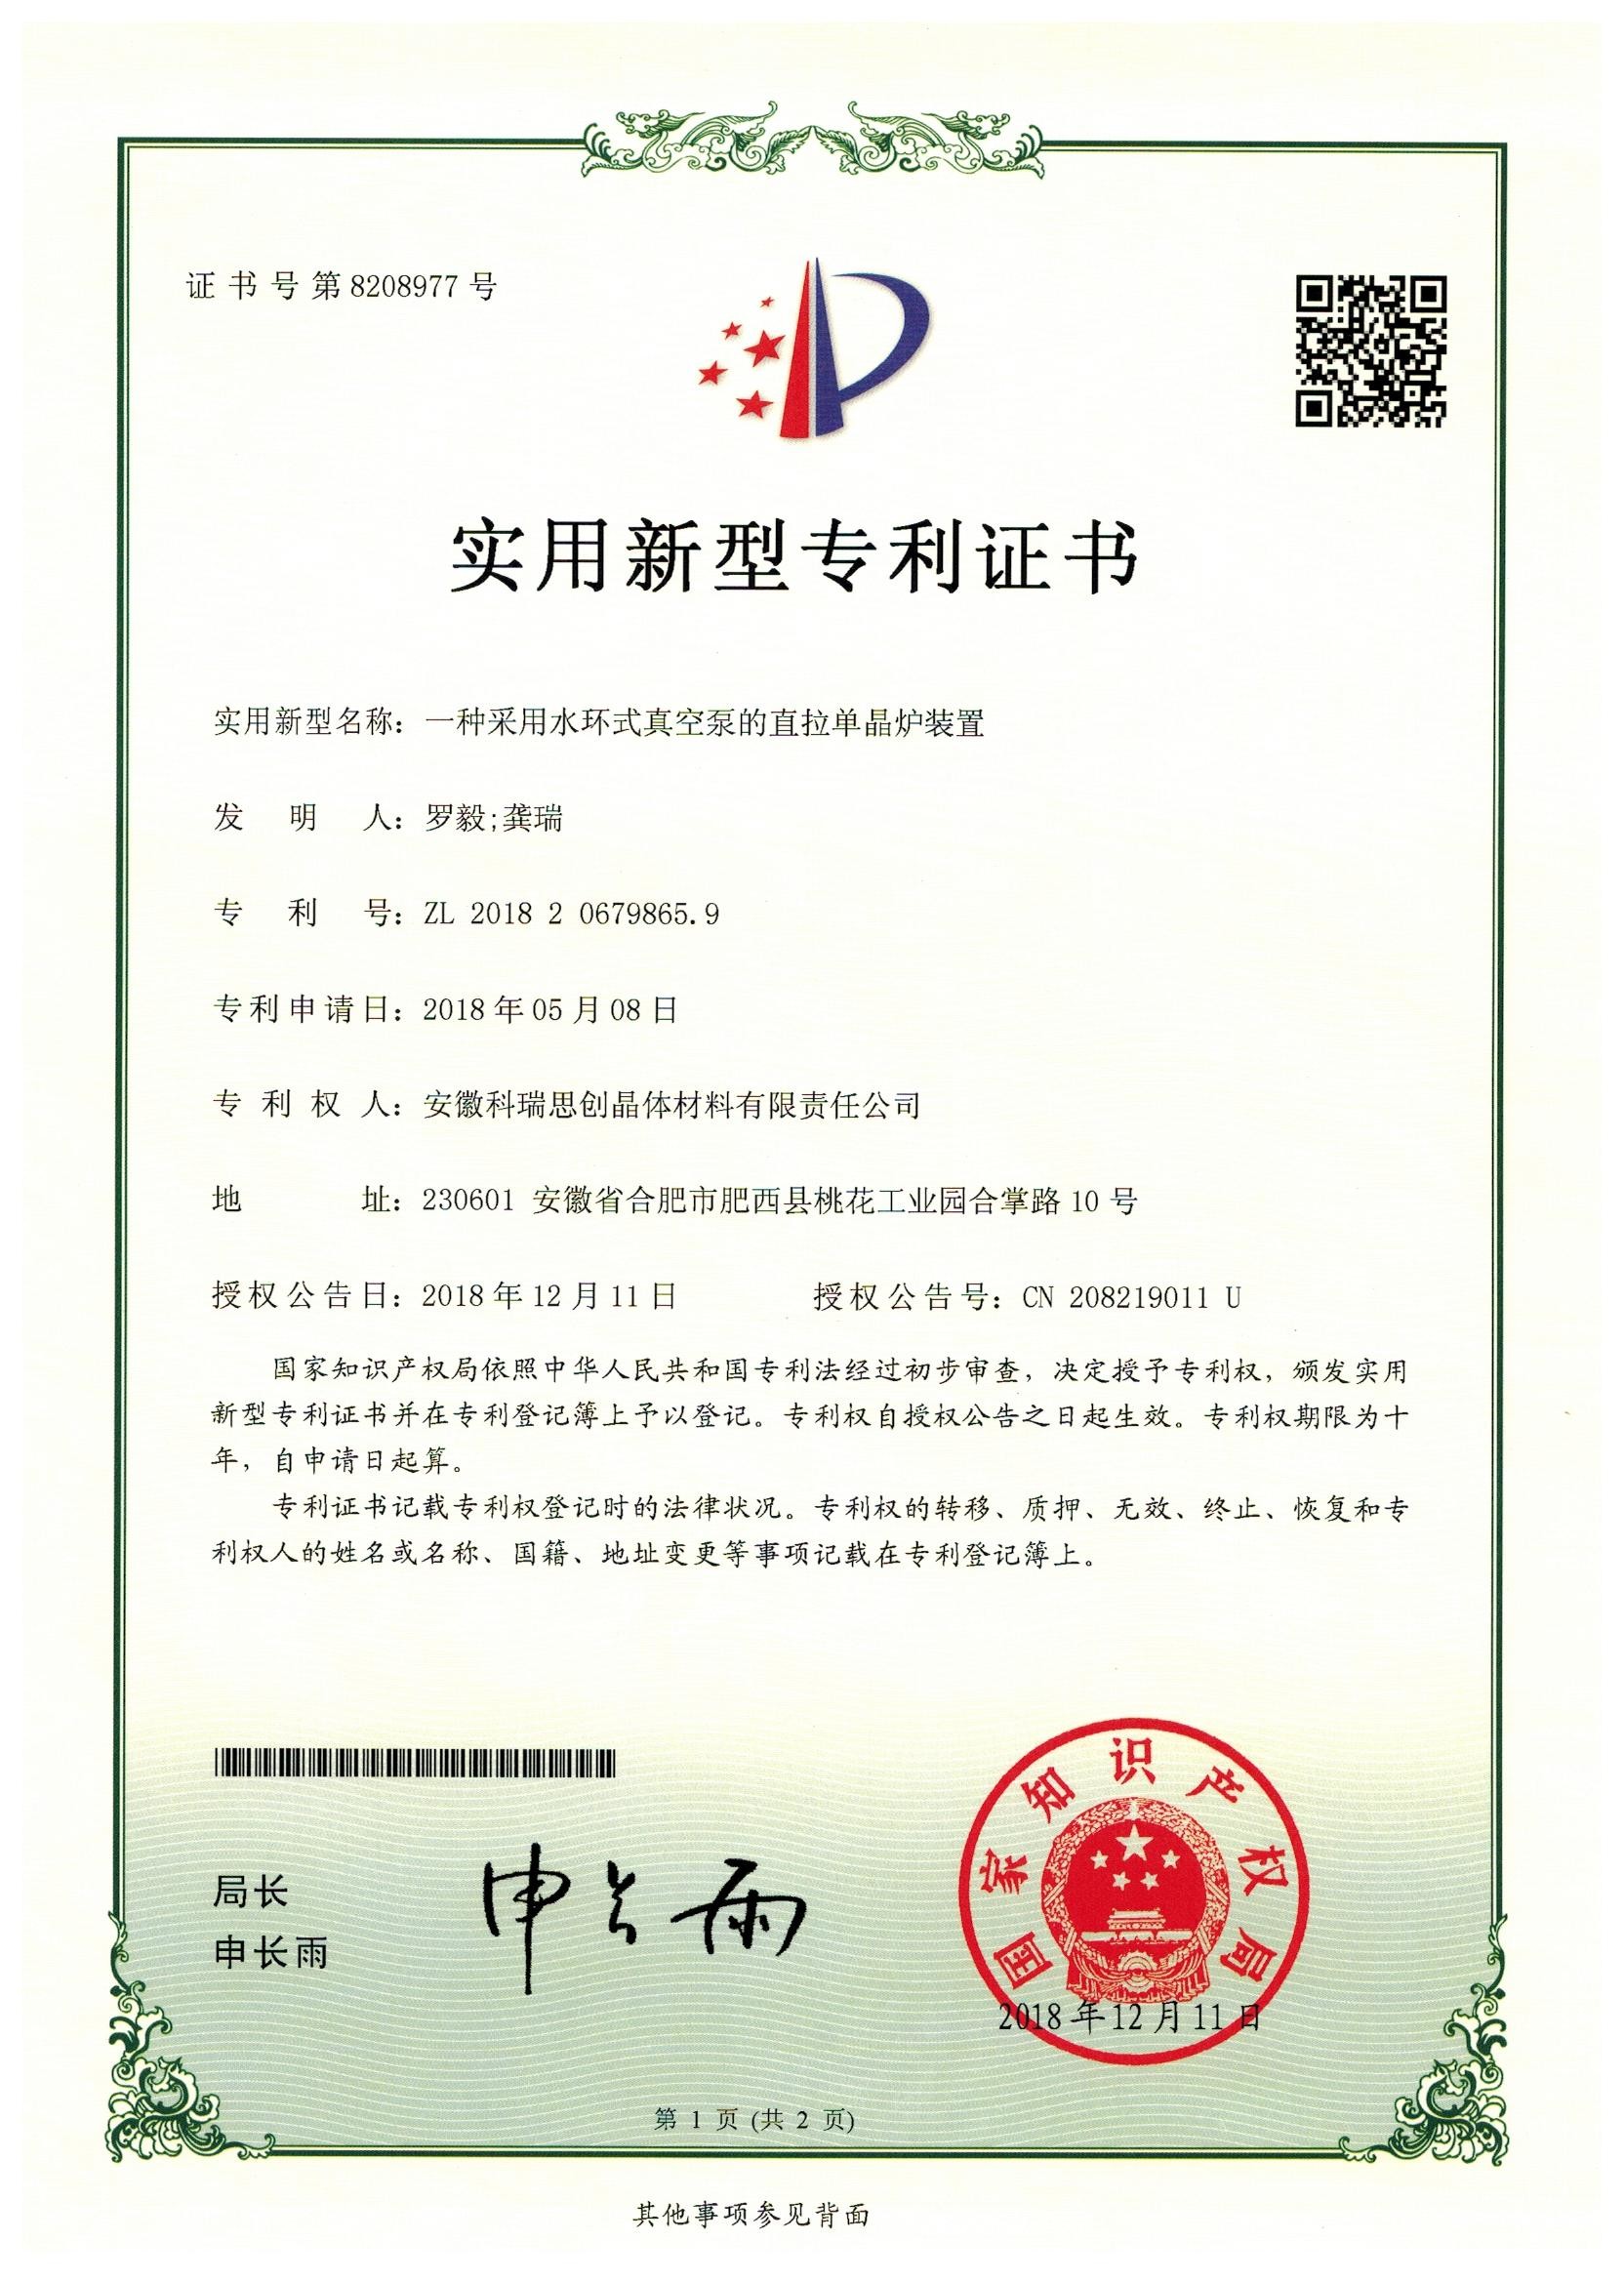 ANHUI CRYSTRO CRYSTAL MATERIALS Co., Ltd. Certifications